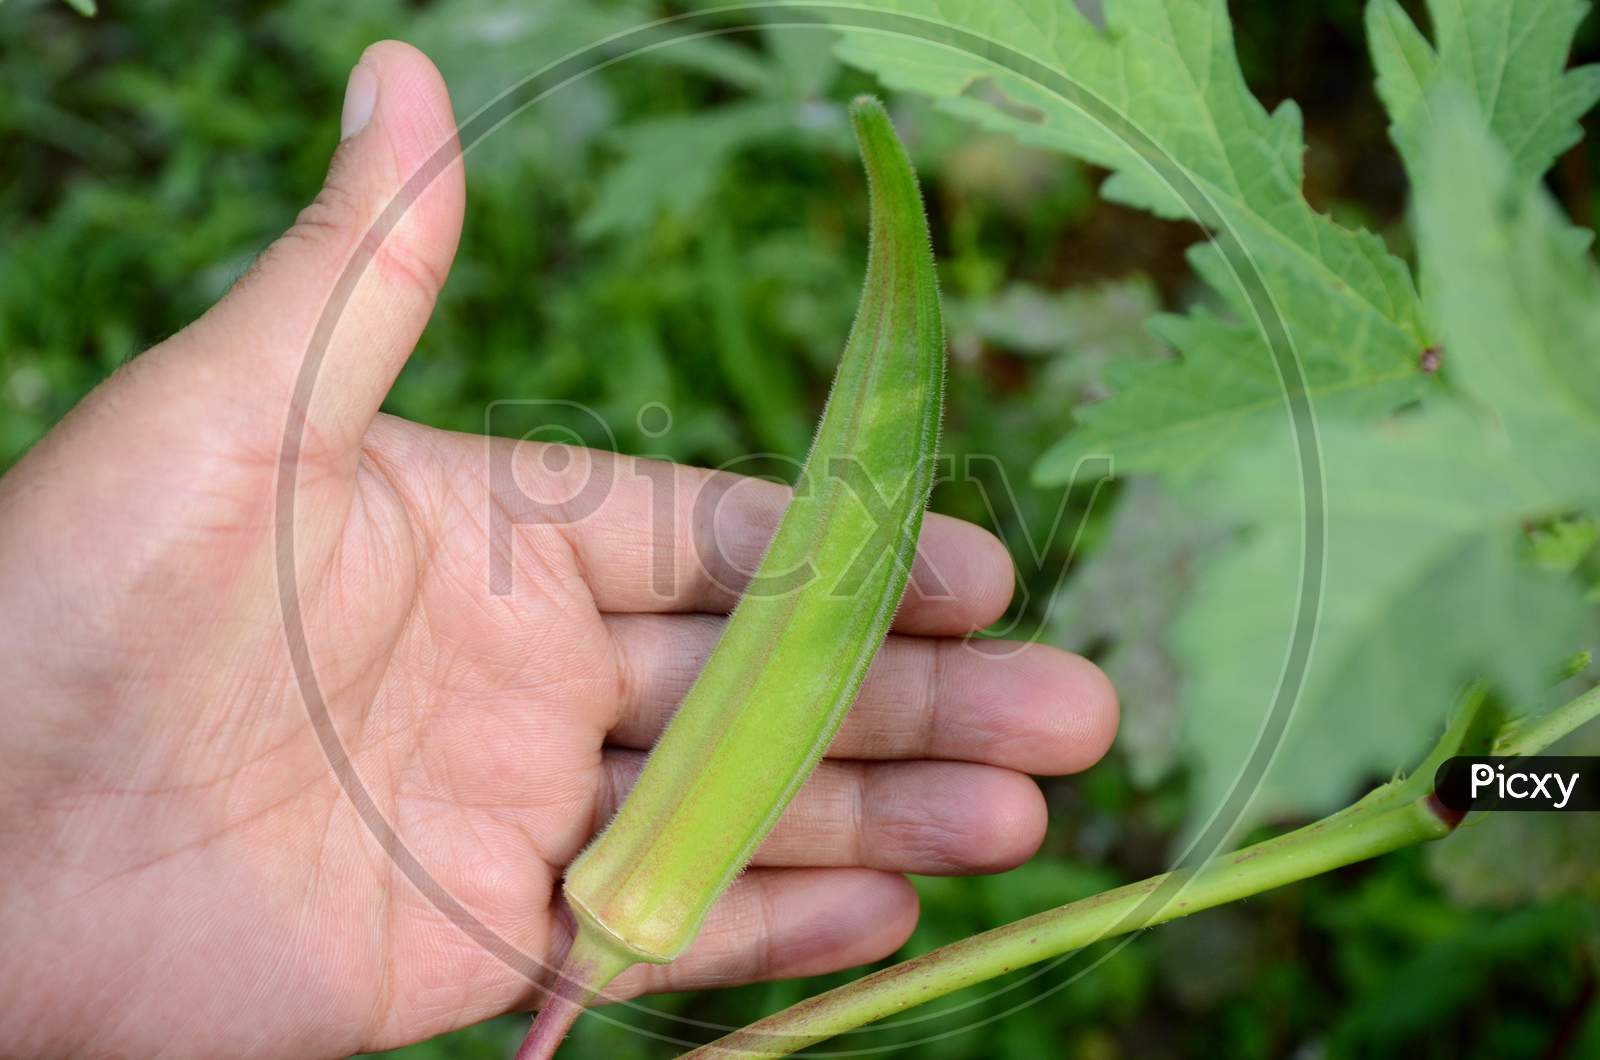 Closeup The Ripe Green Ladyfinger Hold Hand Growing With Leaves And Plant In The Farm Over Out Of Focus Green Background.